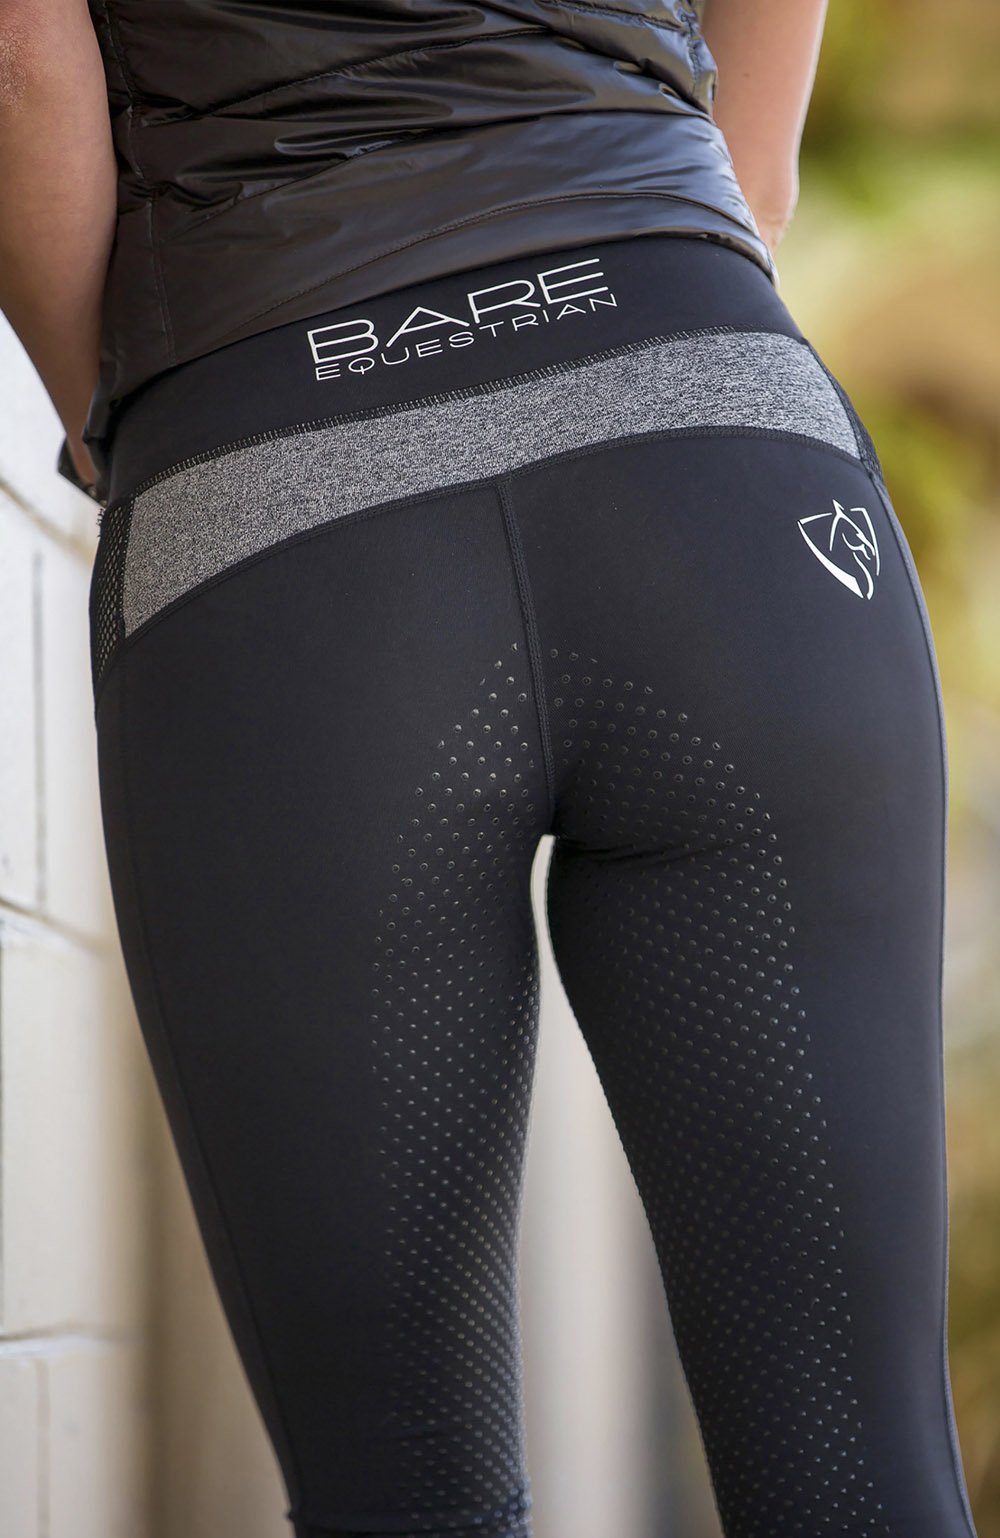 Mill & Hide - Bare Equestrian - Performance Riding Tights - Stormy Rider